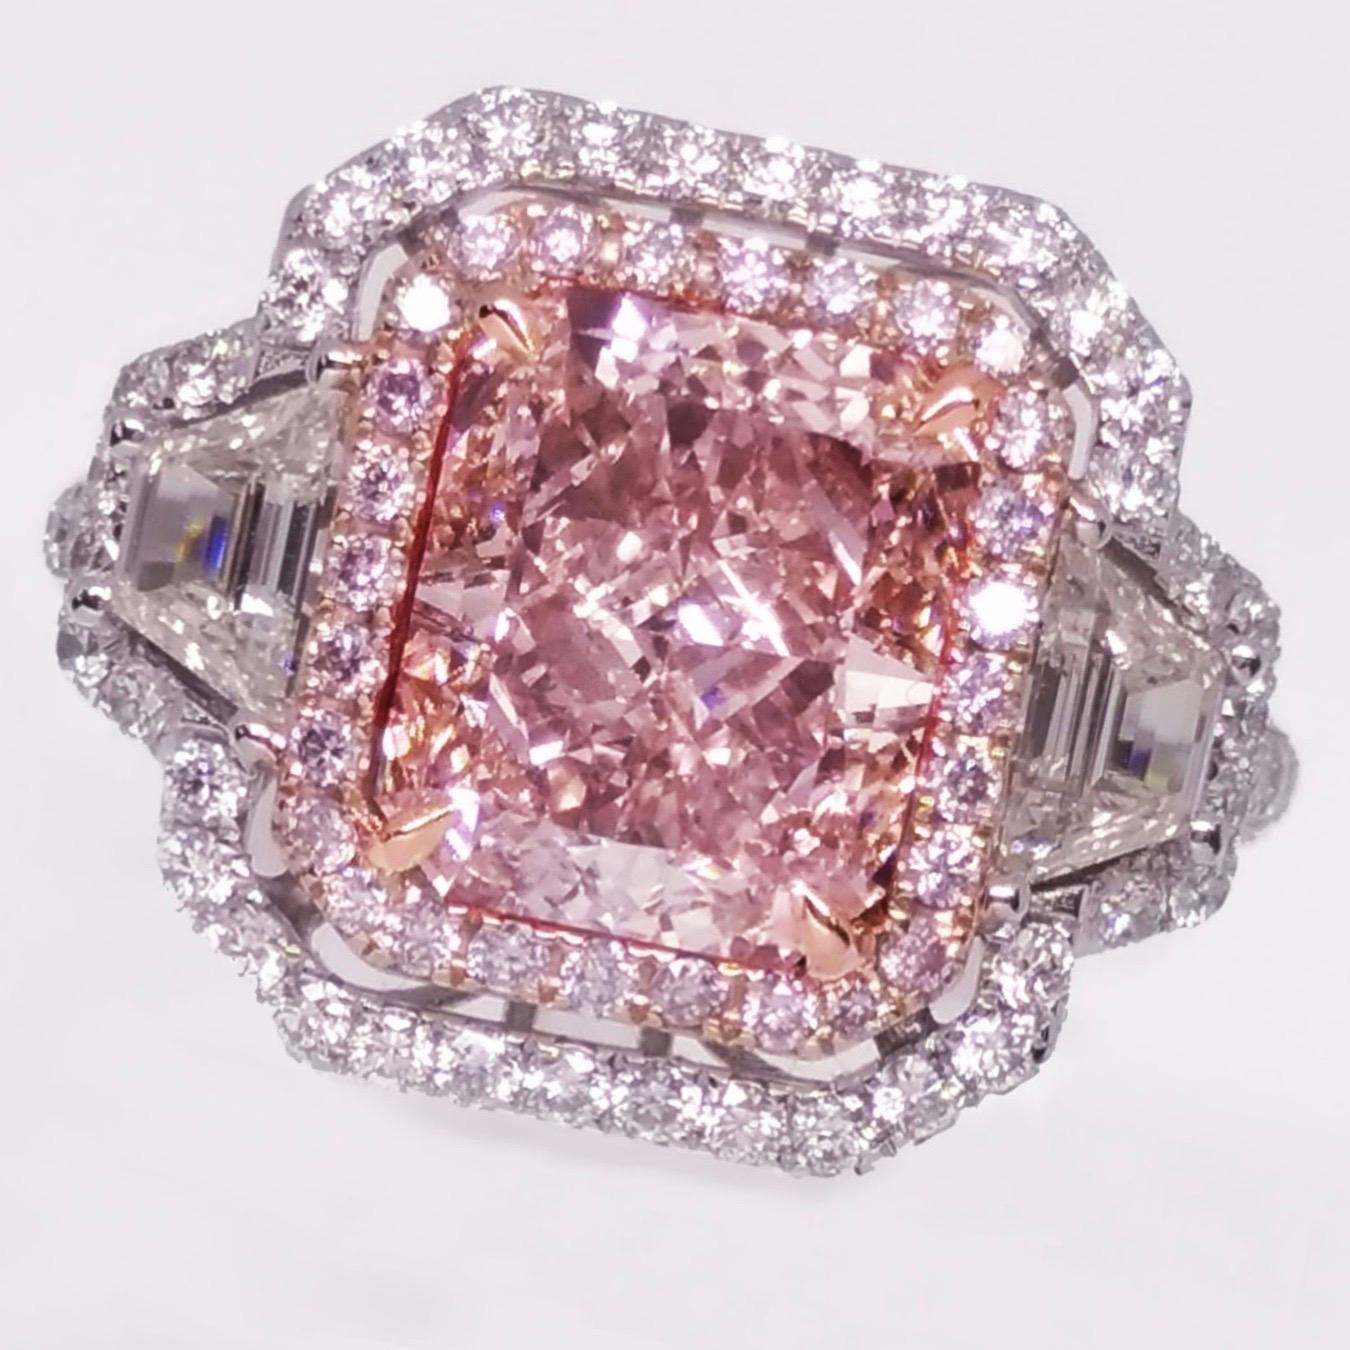 From the Emilio Jewelry Museum Vault, We are Showcasing a stunning 3.00 carat center Gia Certified natural light brown pink. This rings primary color according to the Gia report is pink, and because of the brown overtone that reduces the price